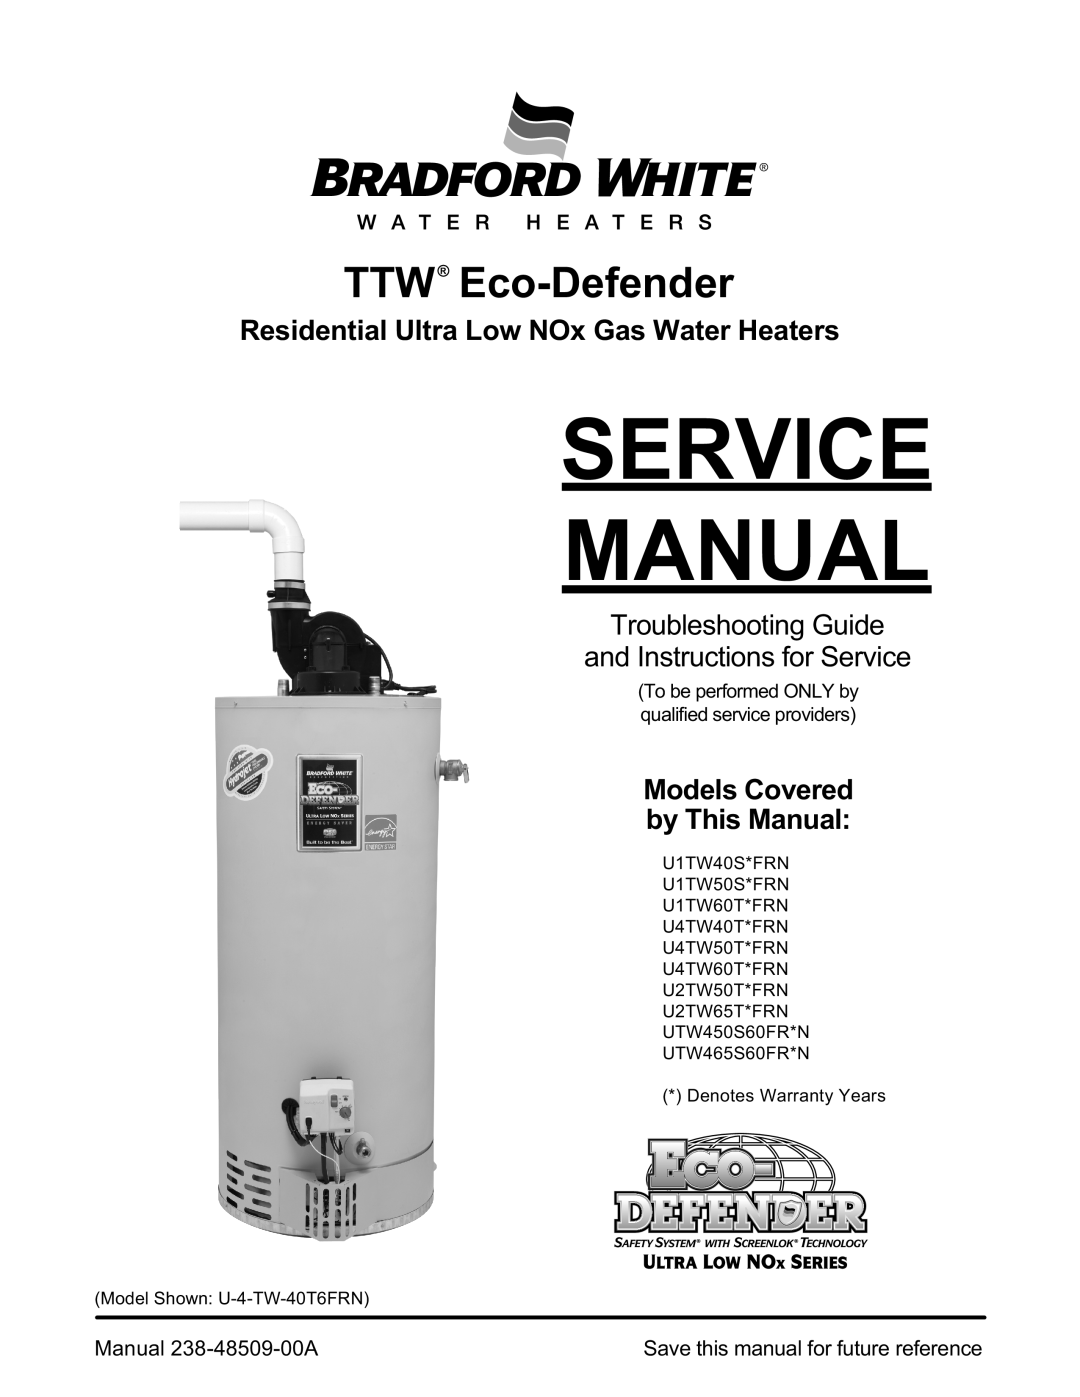 Bradford-White Corp U4TW40T*FRN service manual Service Manual, TTW Eco-Defender, Models Covered by This Manual 